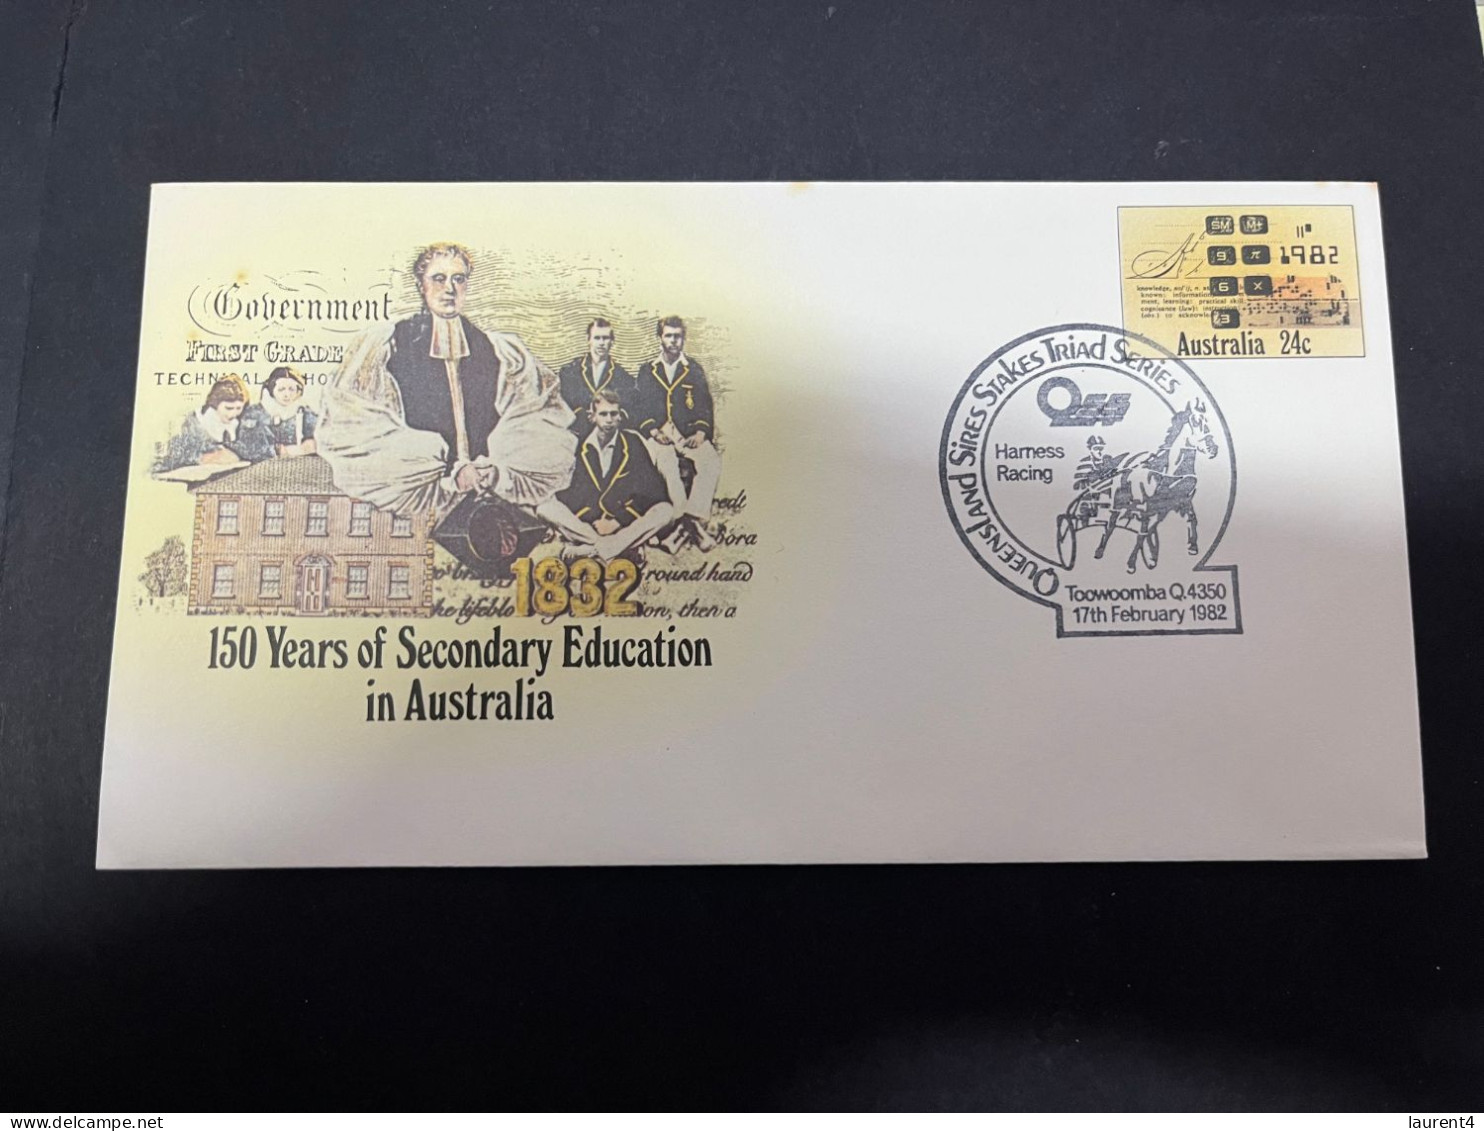 21-4-2024 (2 Z 39) Australia FDC Cover - 1982 - Harness Horse Racing In Queensland (Secondary Education) - Premiers Jours (FDC)